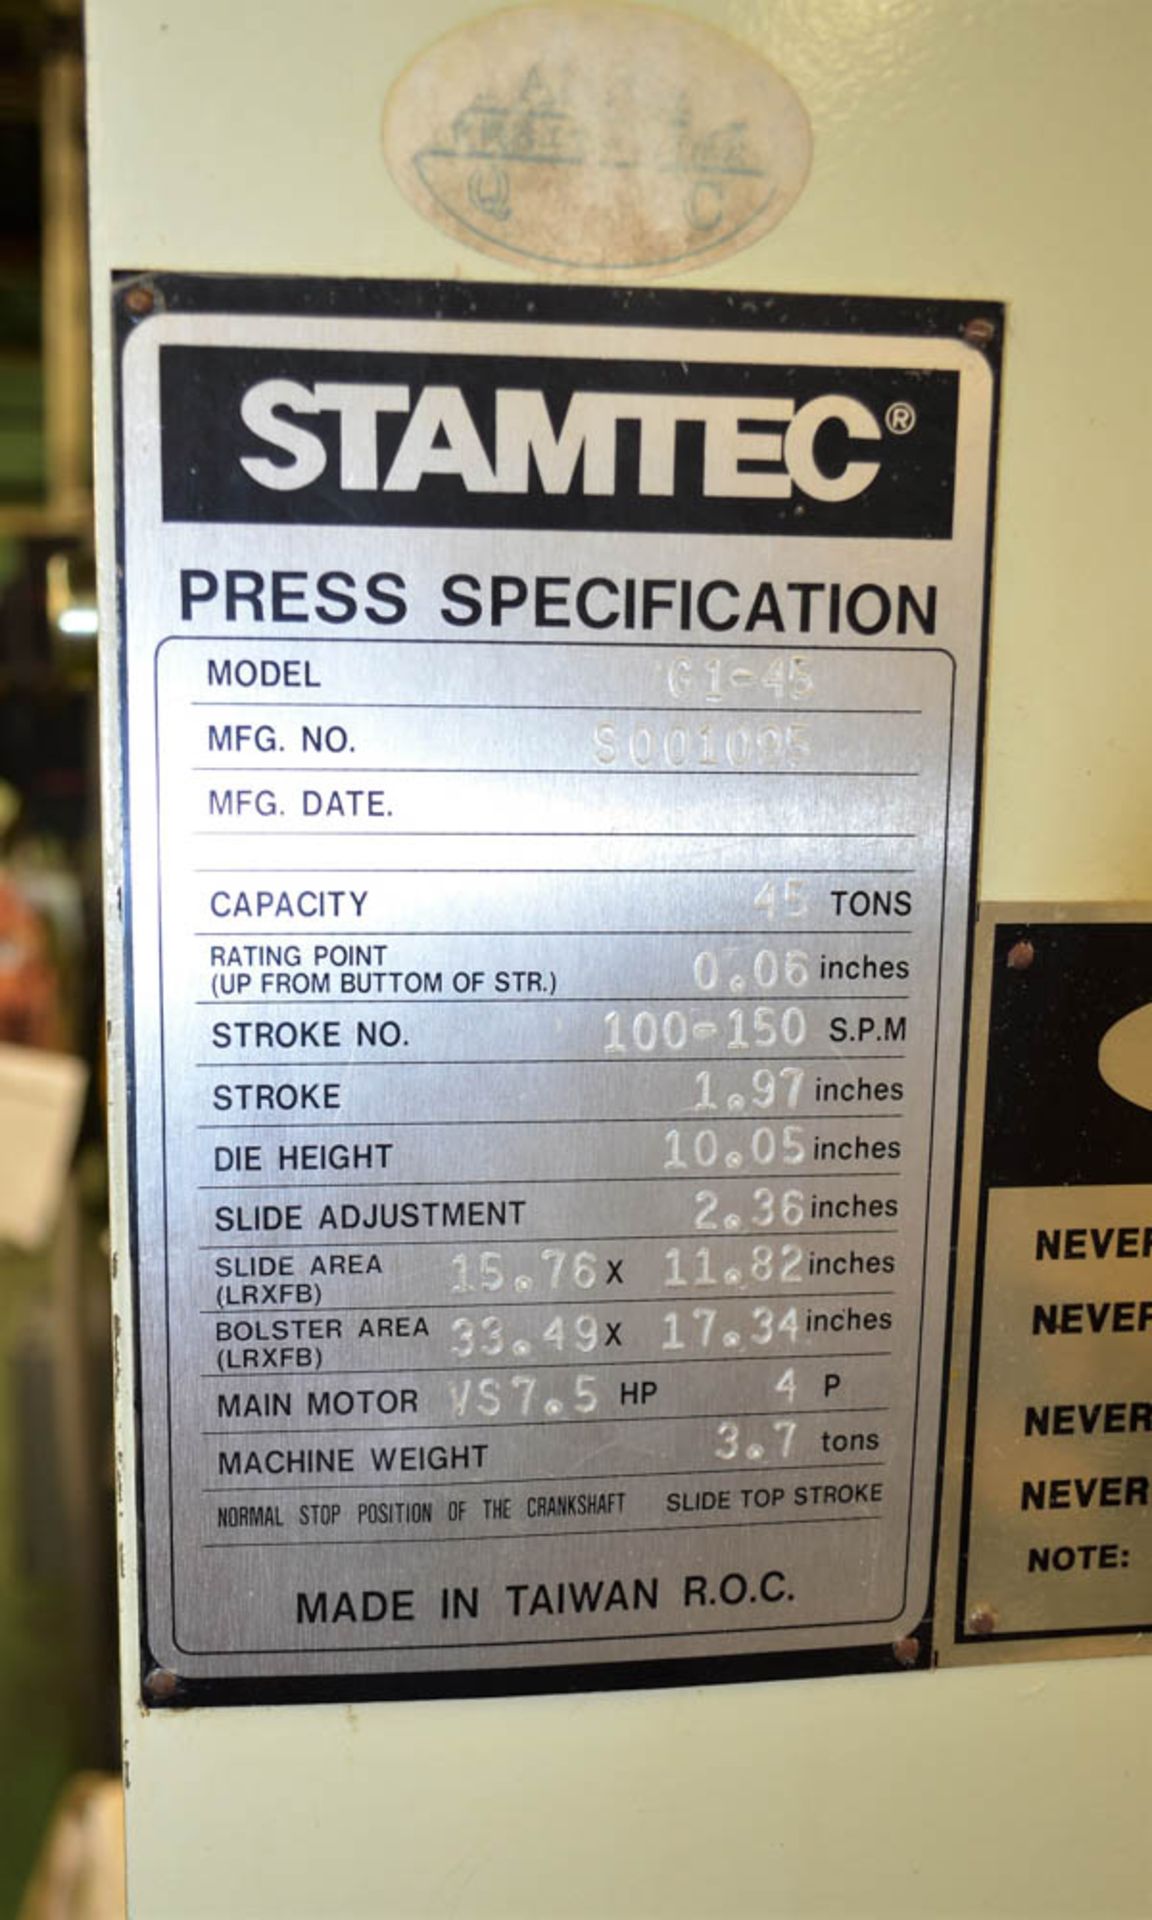 STAMTEC MDL. G1-45 45 TON CAPACITY AIR CLUTCH PUNCH PRESS, 100-150 SPM, 1.97" STROKES - Image 5 of 5